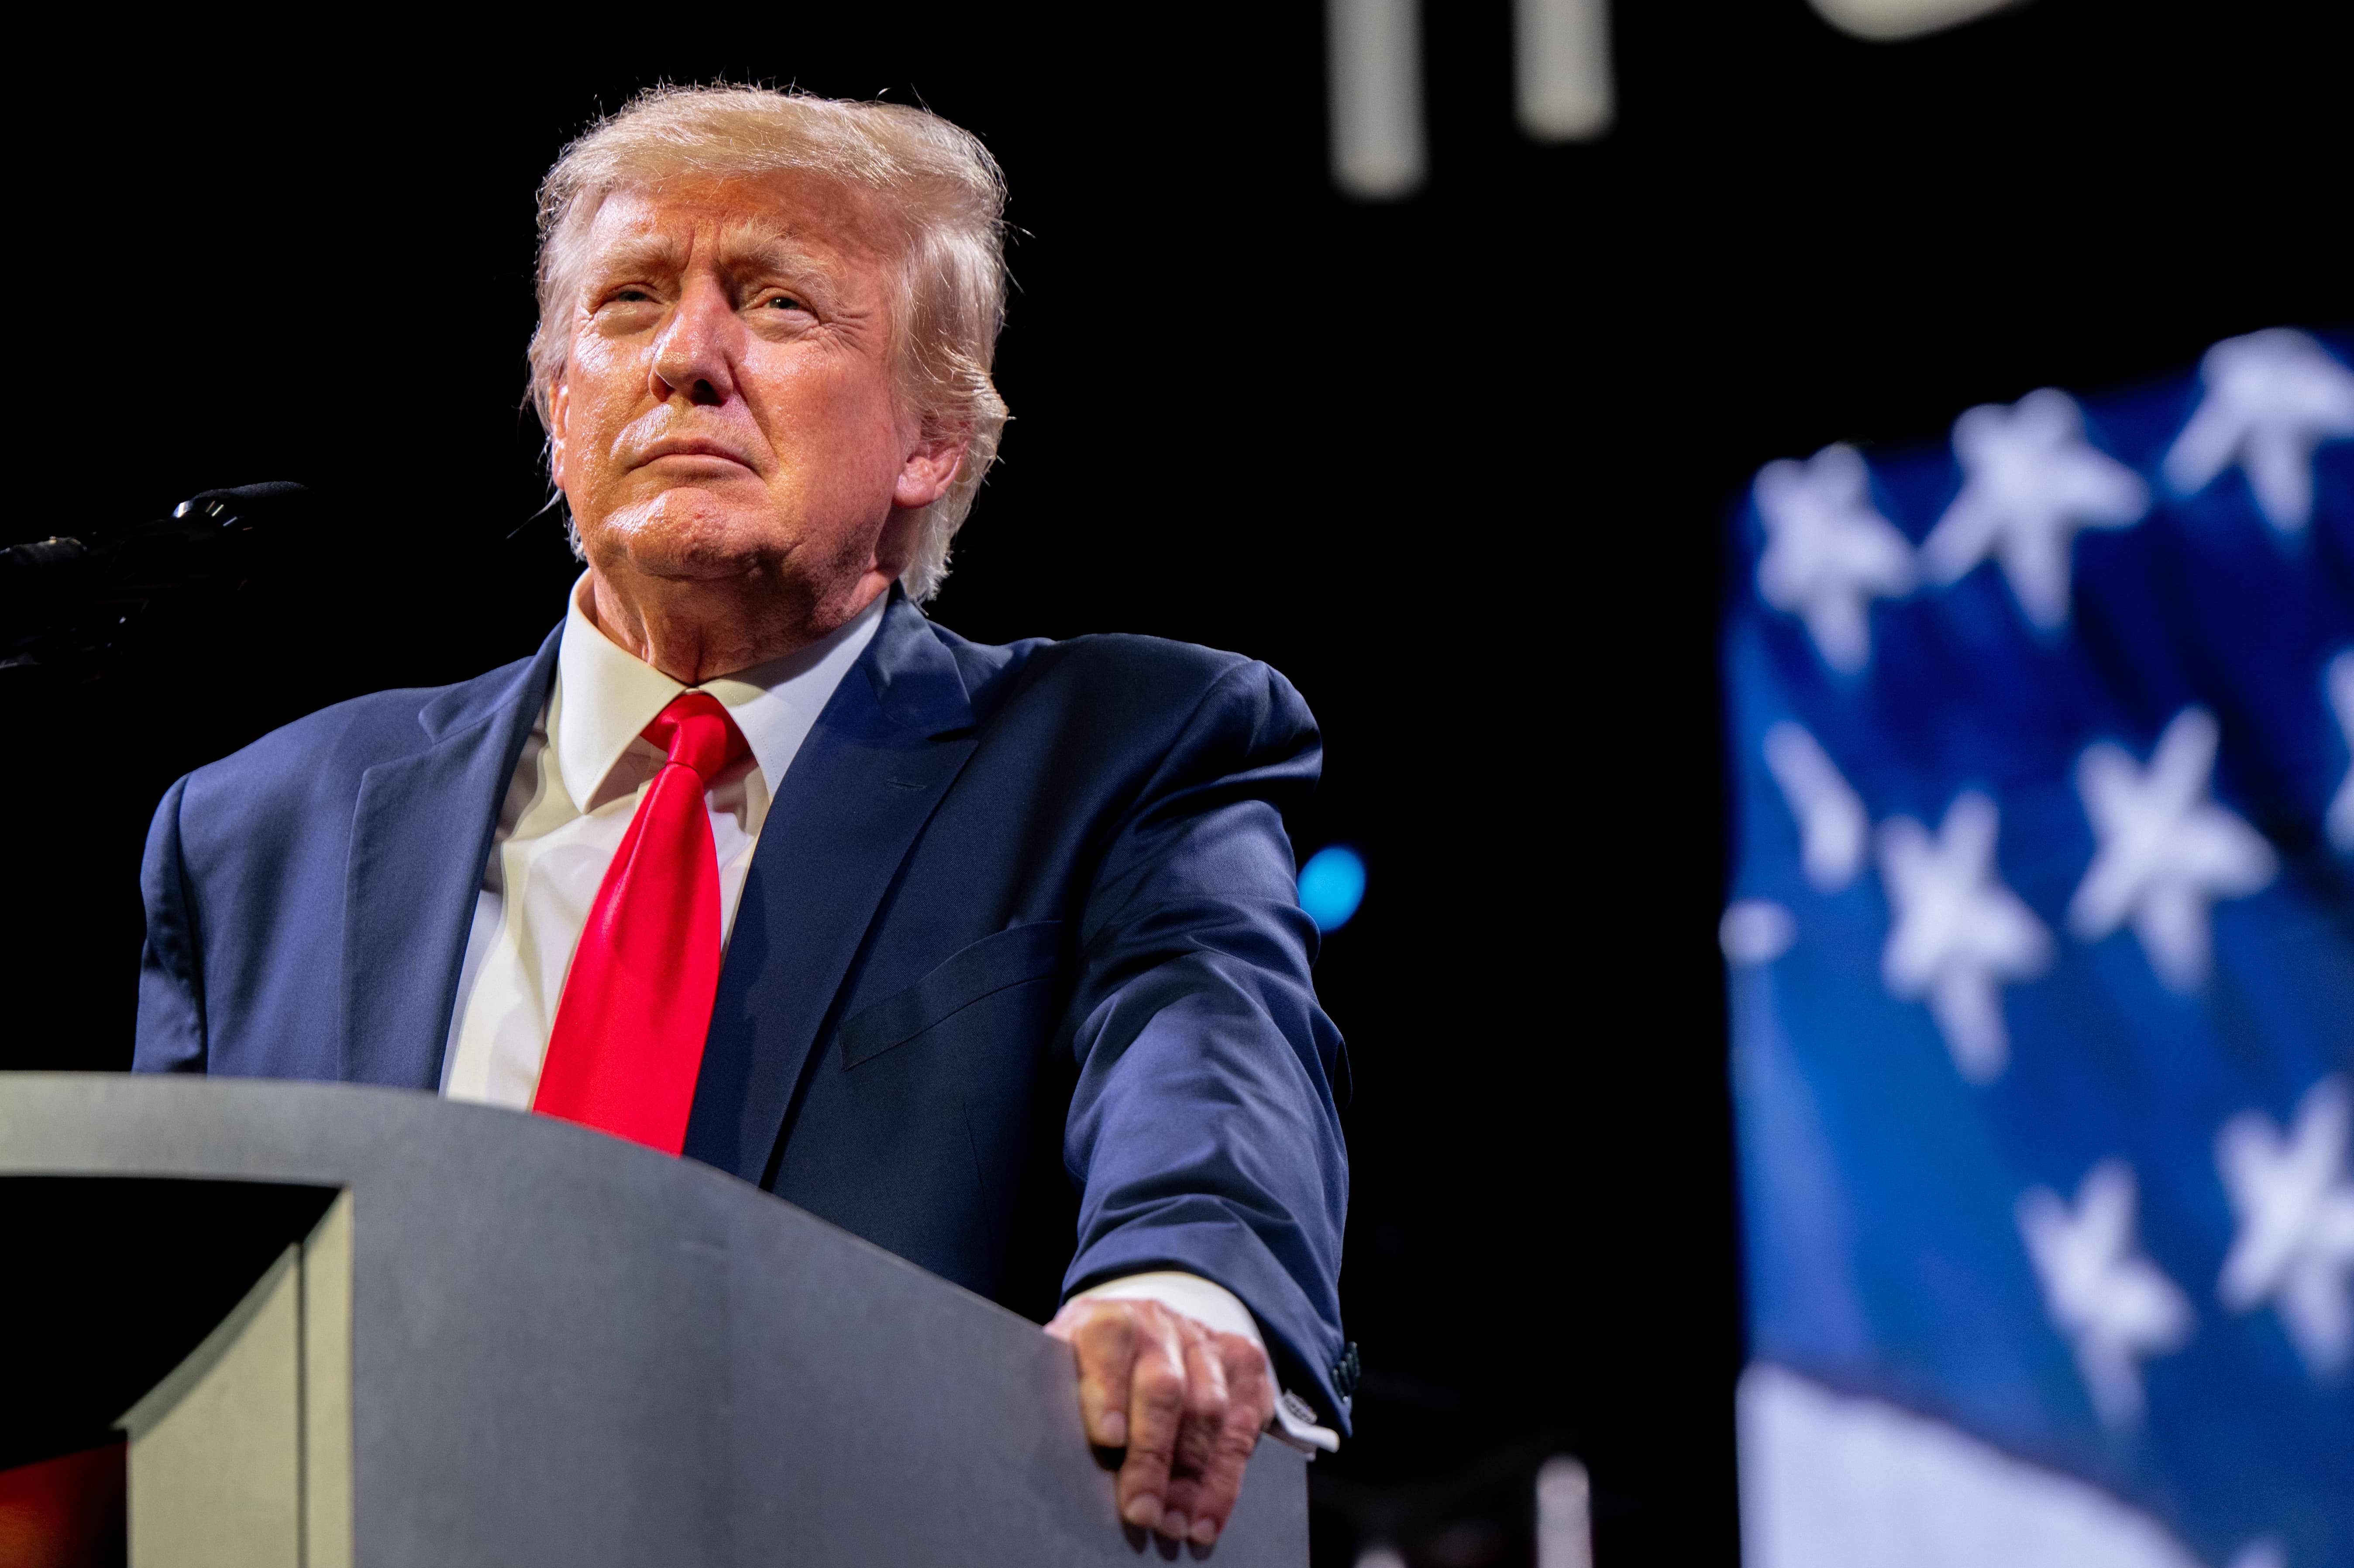 AUSTIN, TEXAS - MAY 14: Former U.S. President Donald Trump speaks during the American Freedom Tour at the Austin Convention Center on May 14, 2022 in Austin, Texas. The national event gathered conservatives from around the country to defend, empower and help promote conservative agendas nationwide.